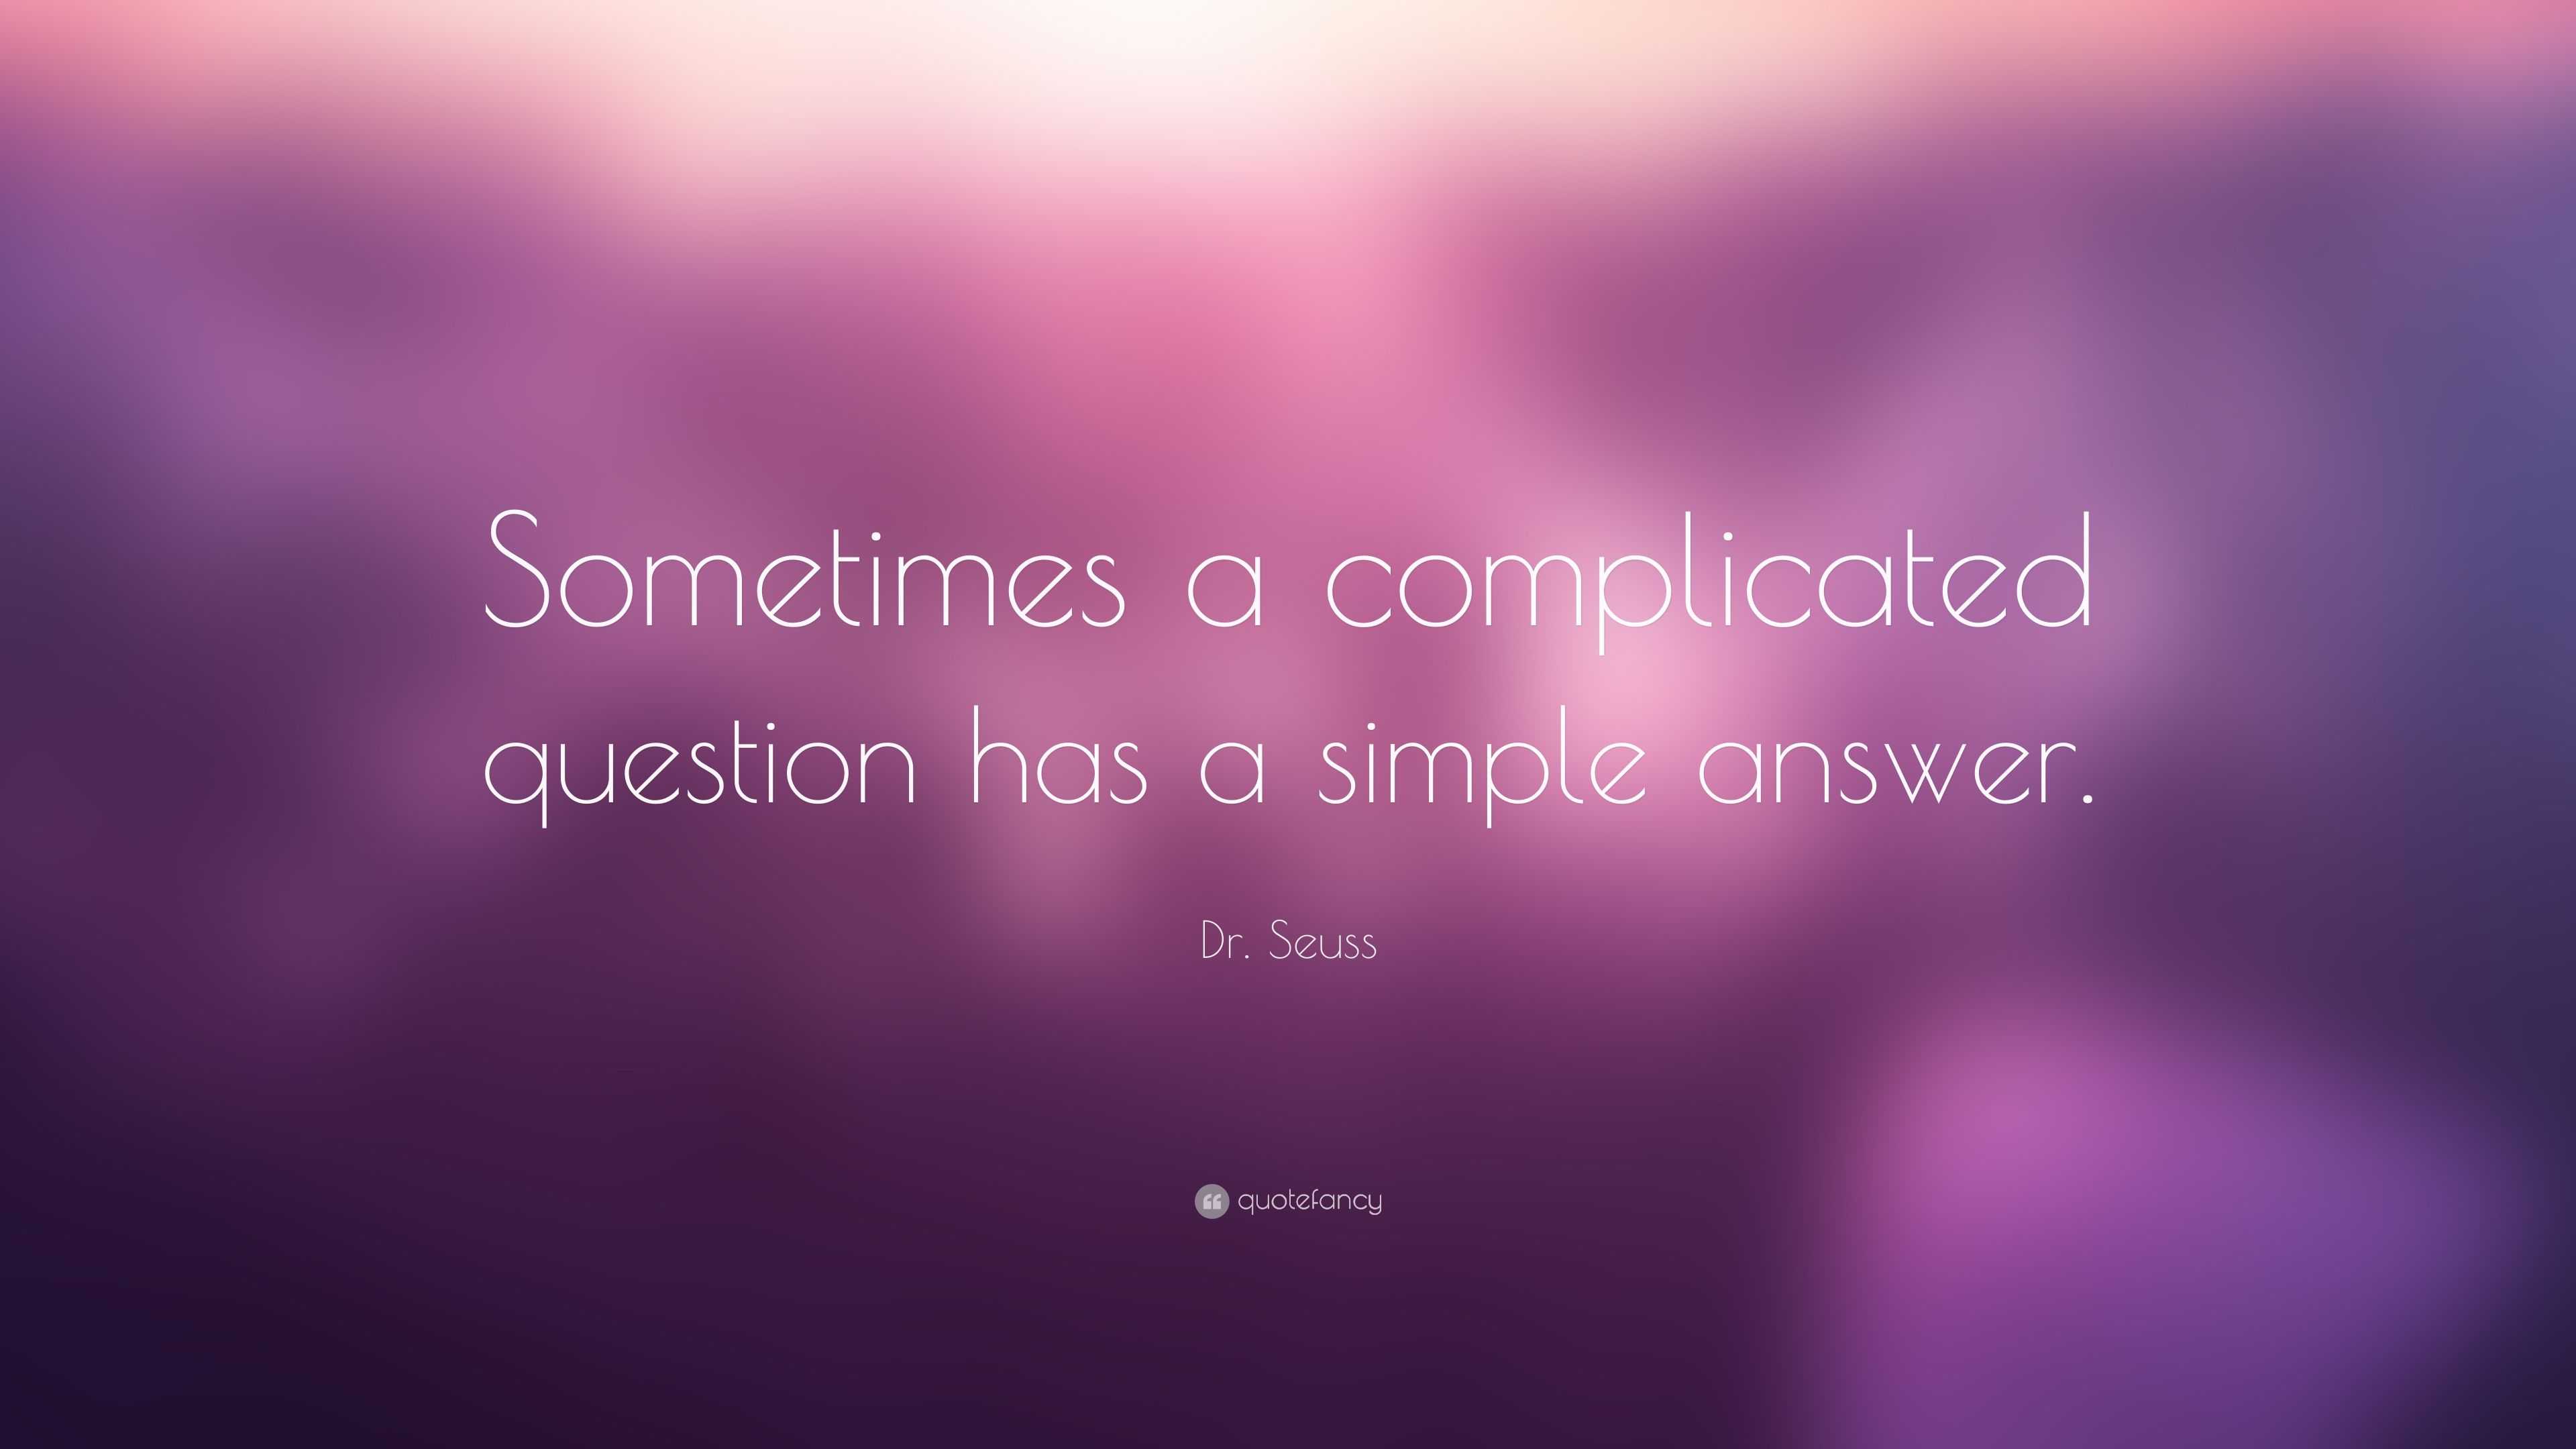 Dr. Seuss Quote: “Sometimes a complicated question has a simple answer.”